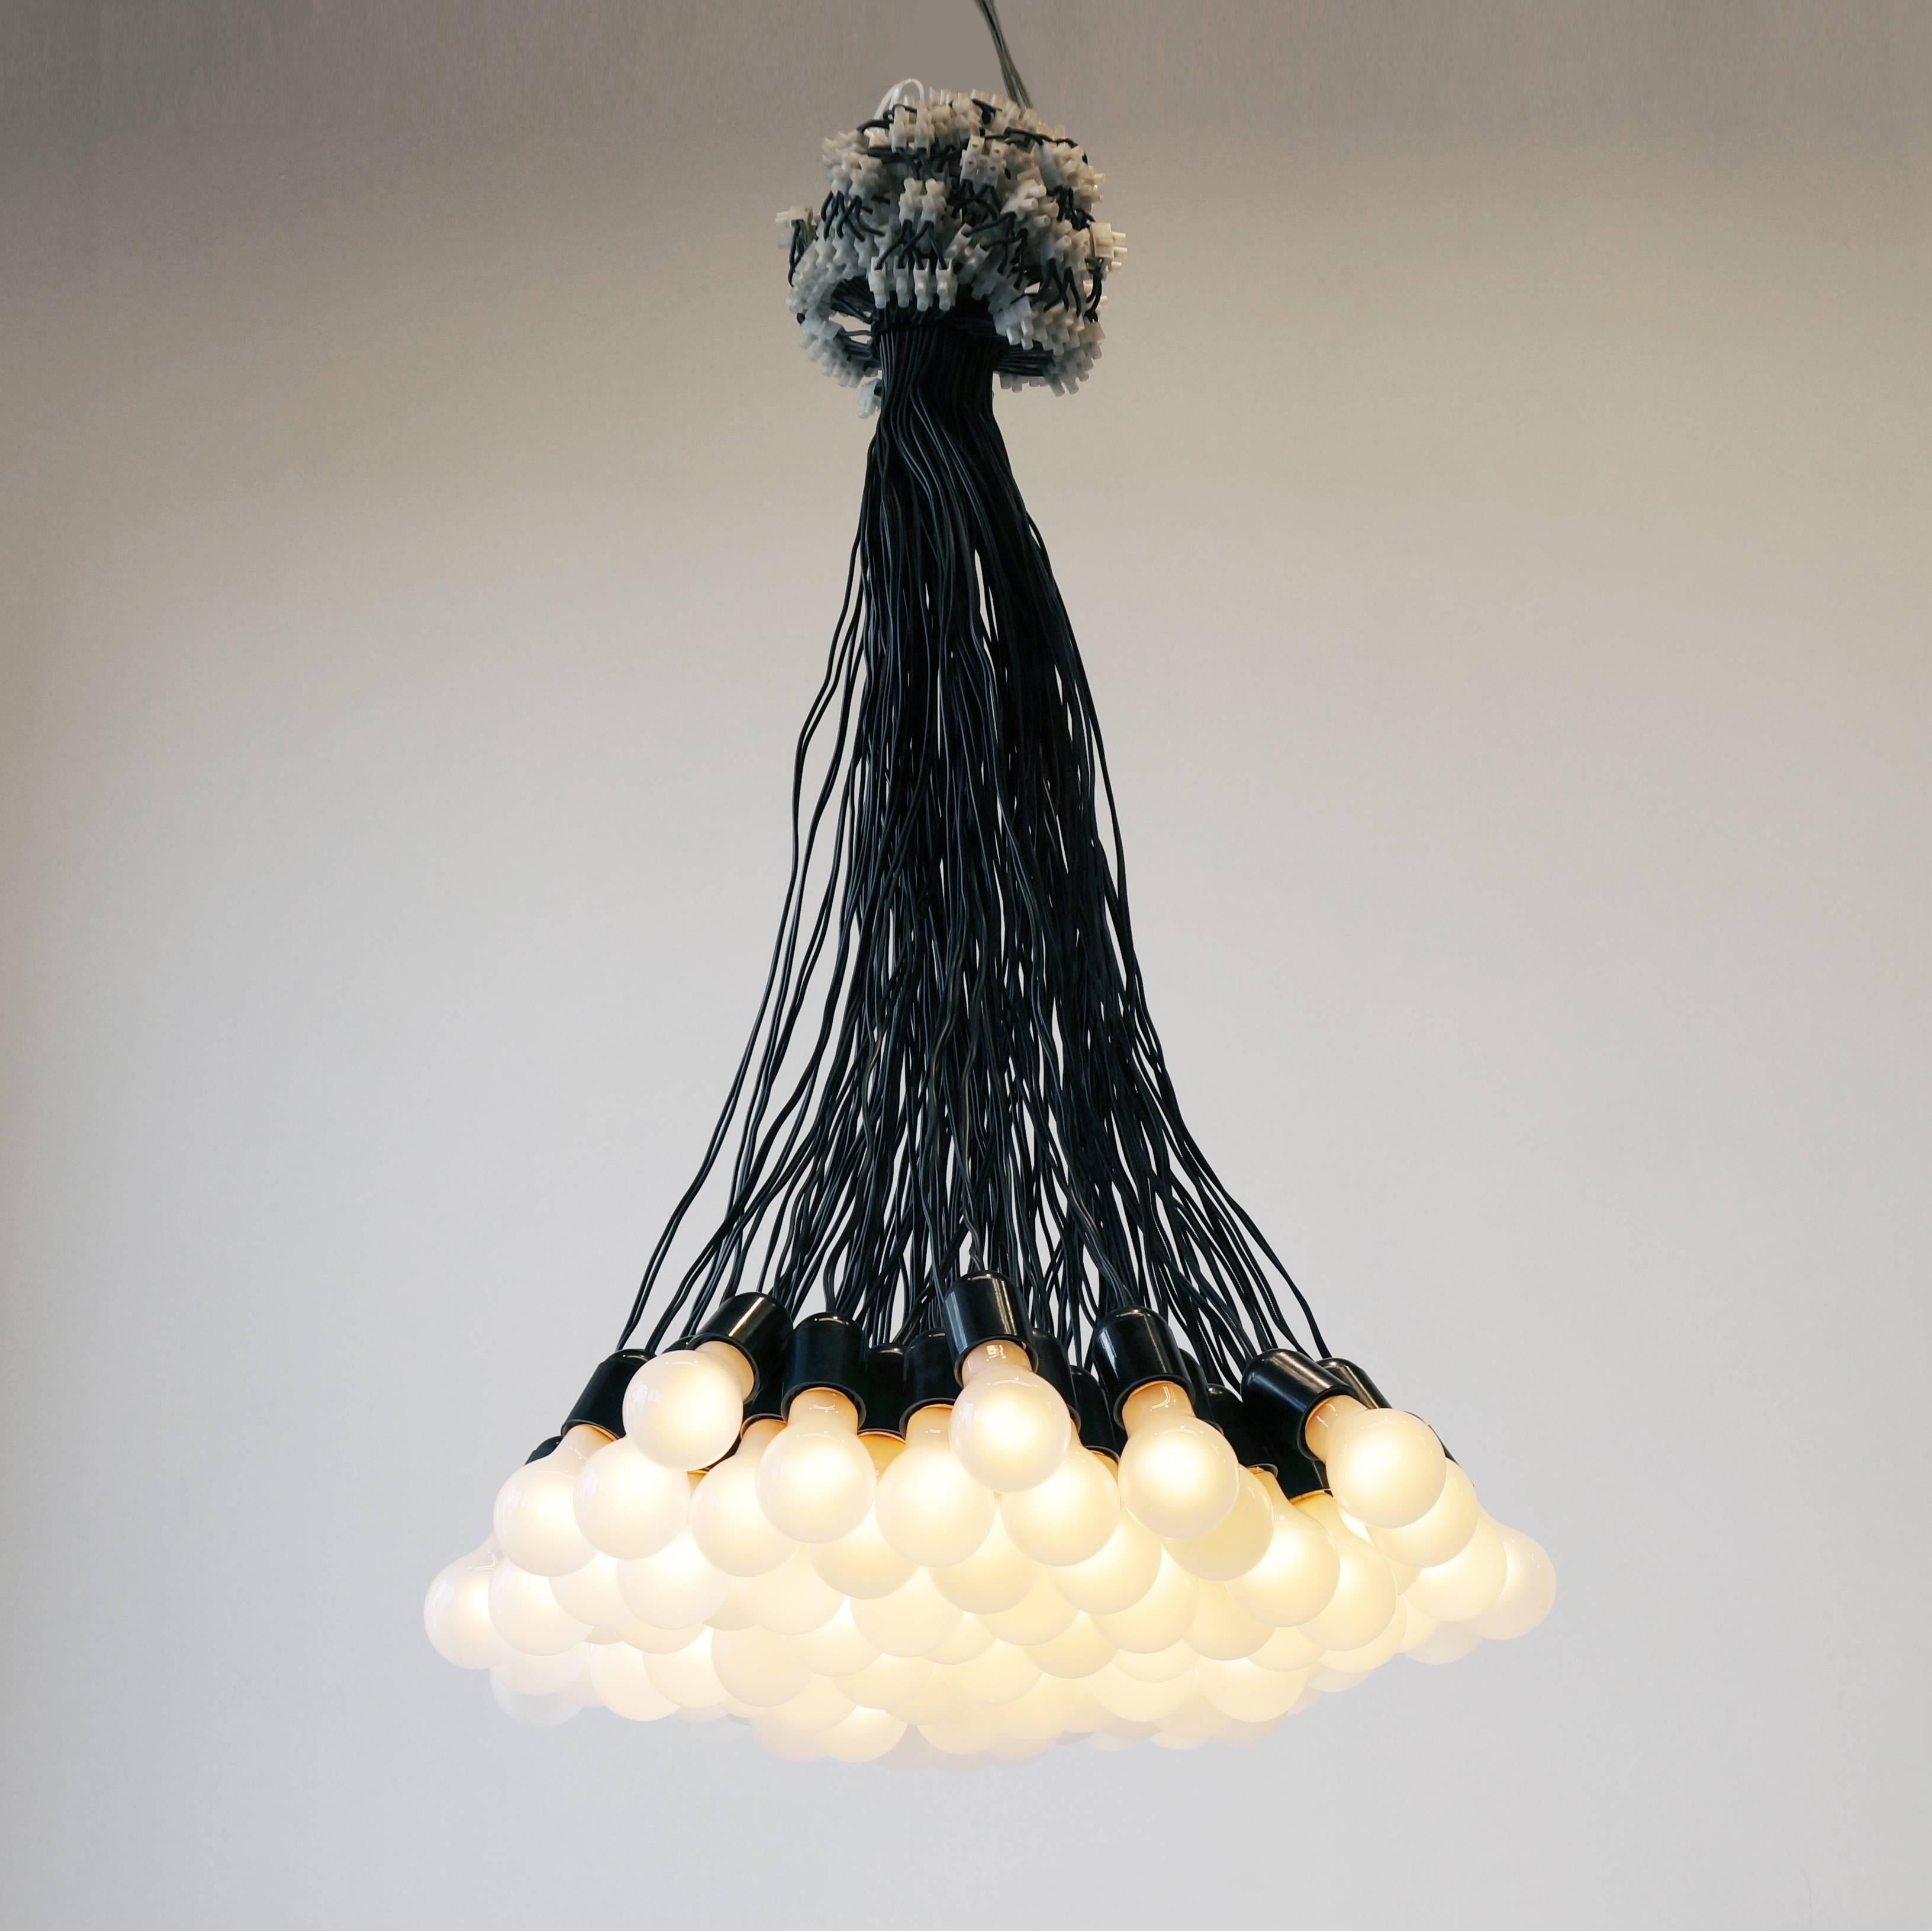 85 Lamps By Rody - 2 For Sale on 1stDibs